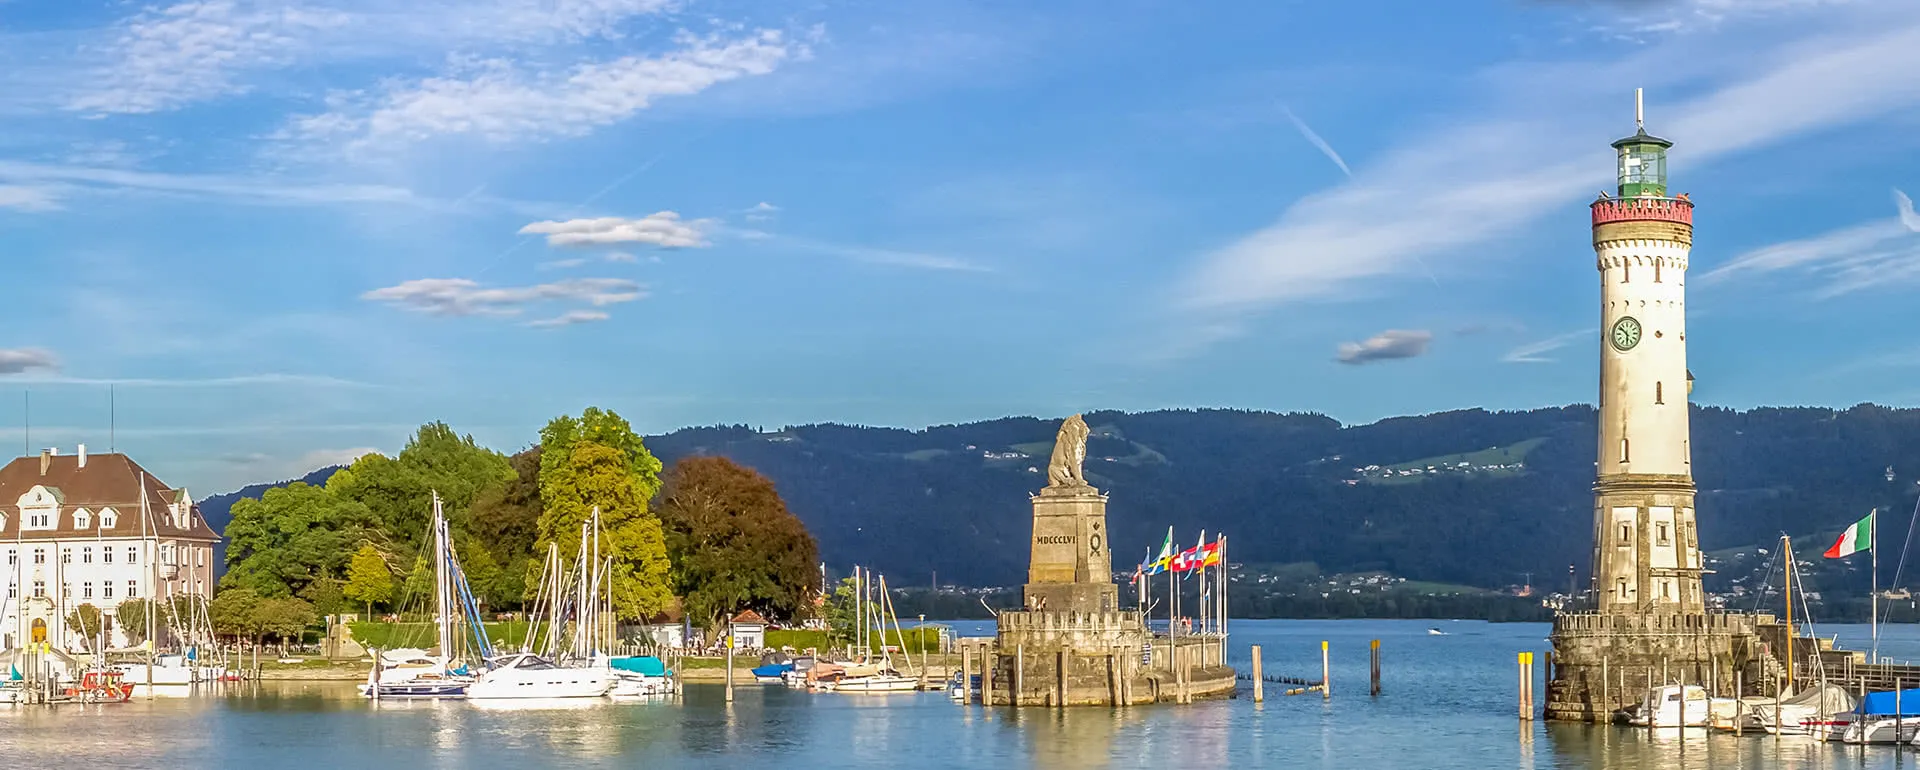 Lindau - the destination with youth hostels